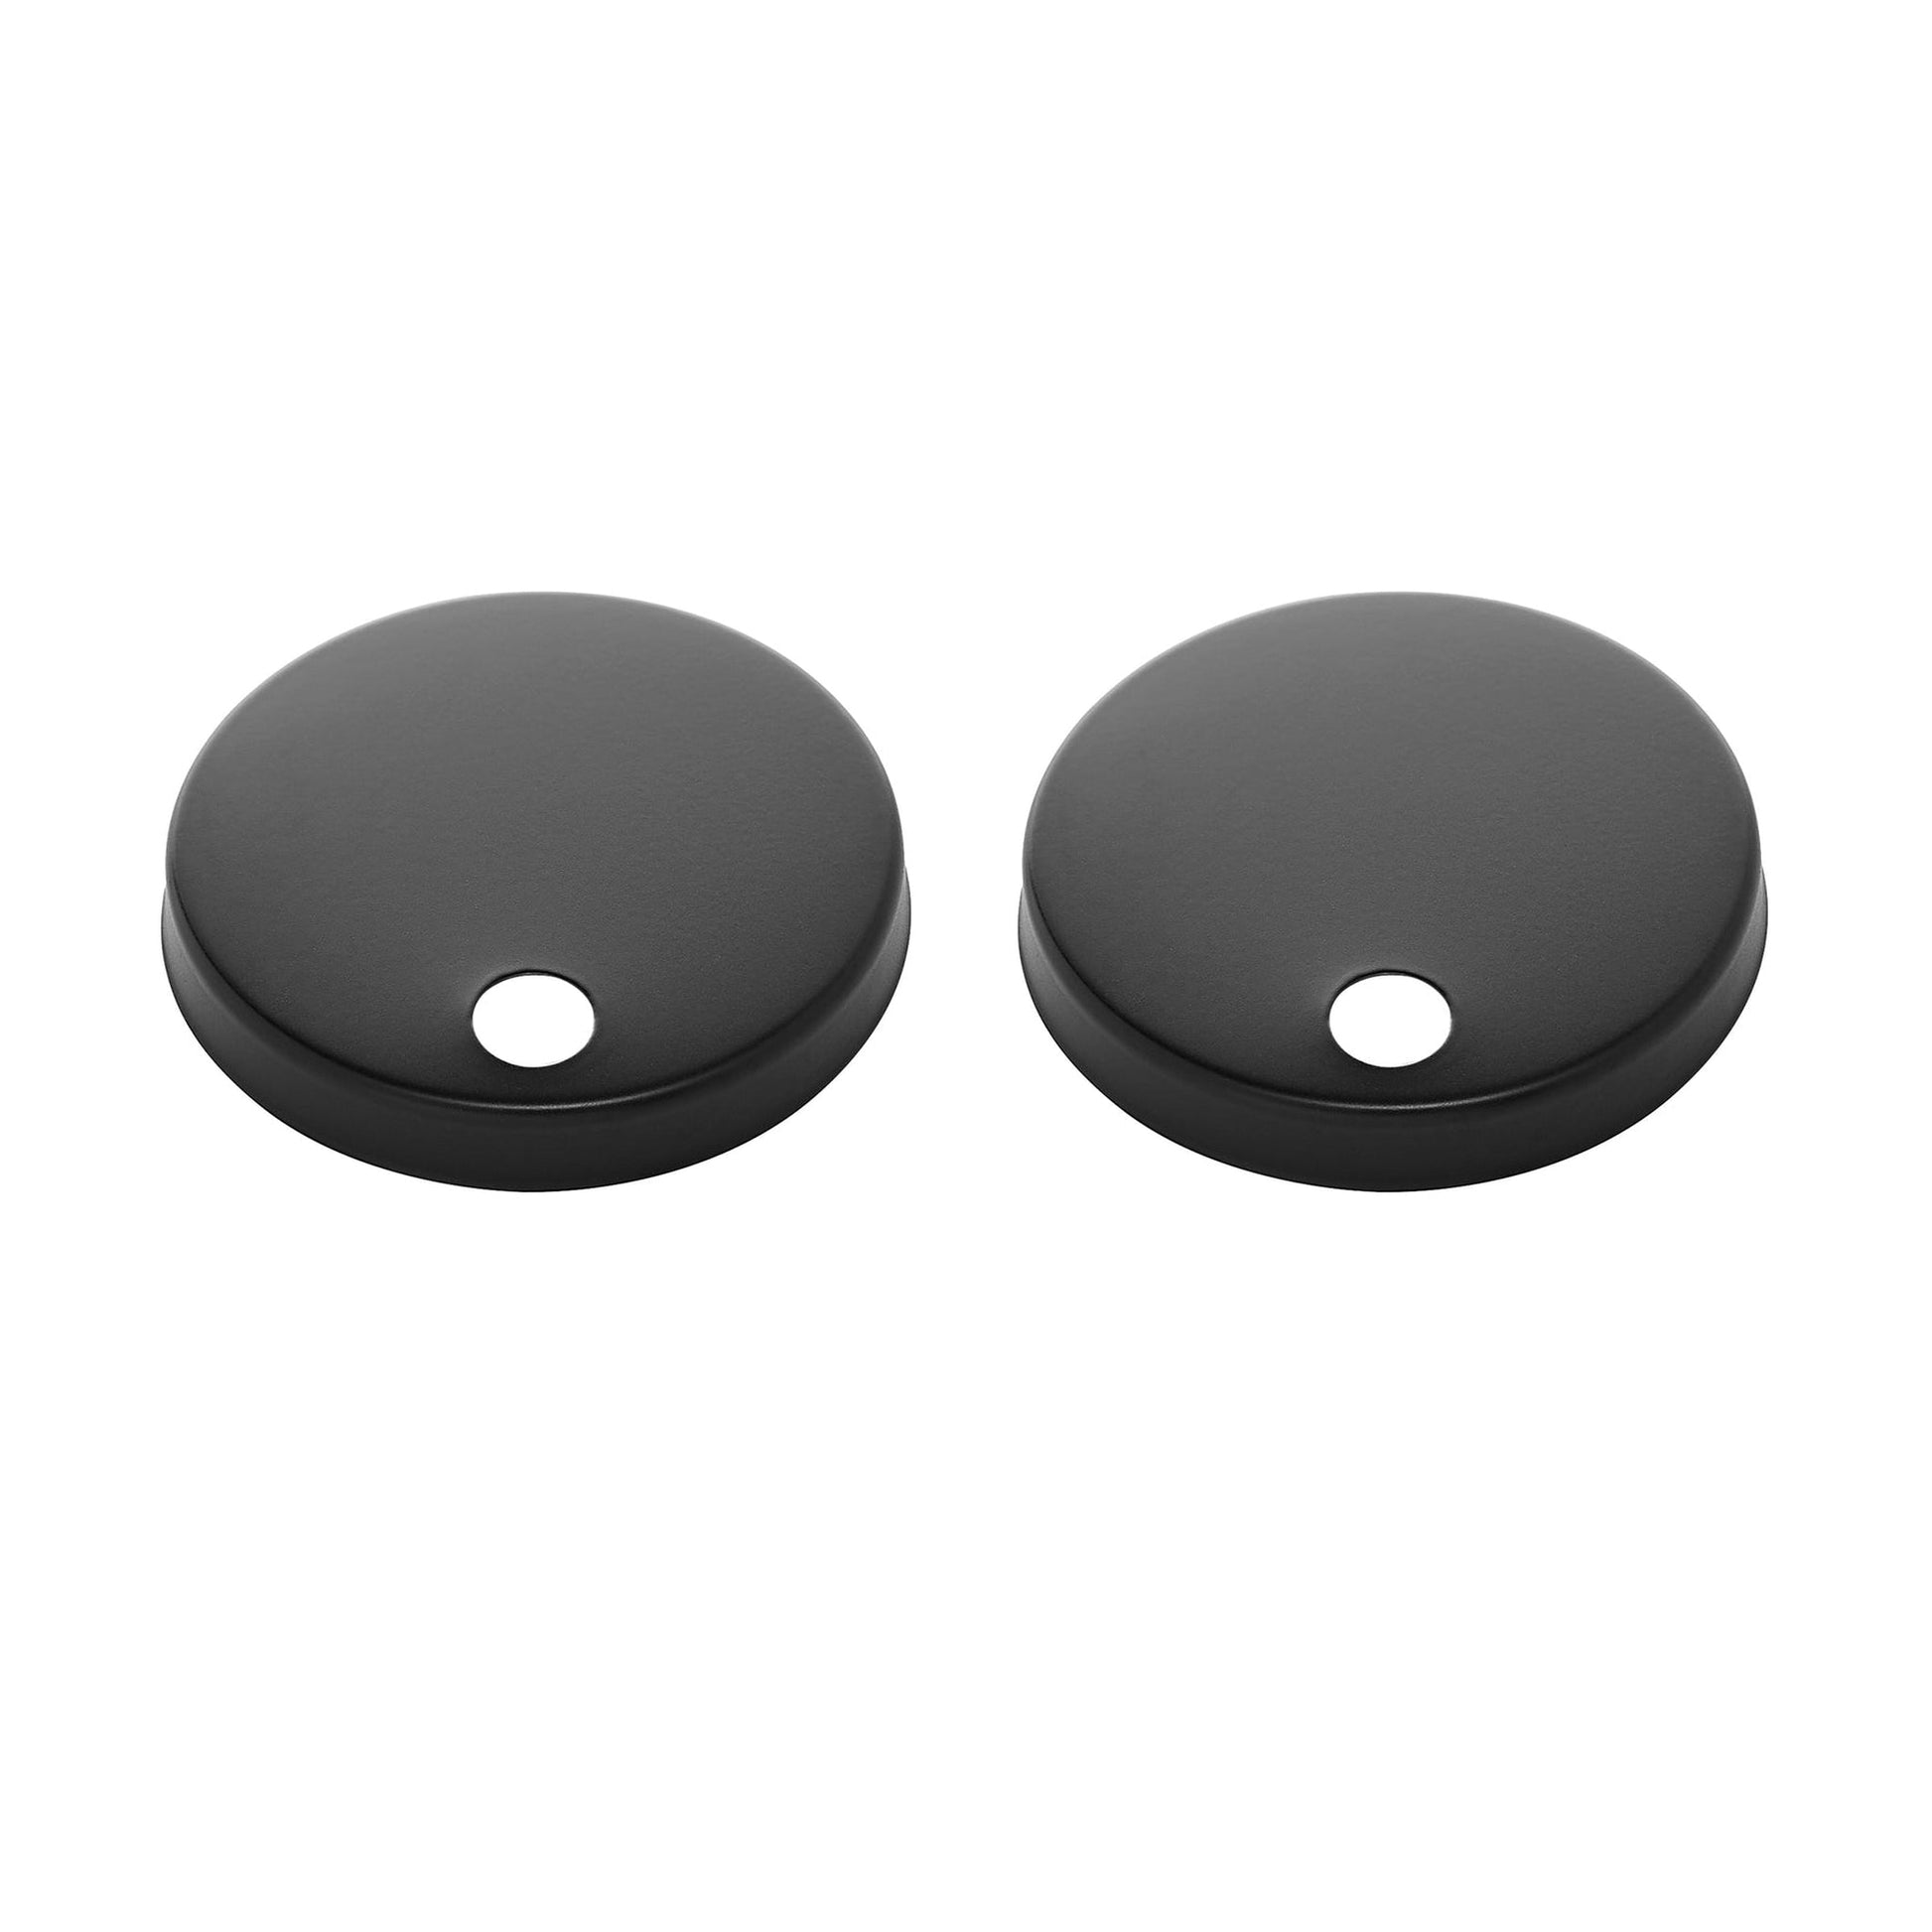 Swiss Madison Round Black Toilet Push Buttons With QQ Feet For SM-1T256, SM-1T205